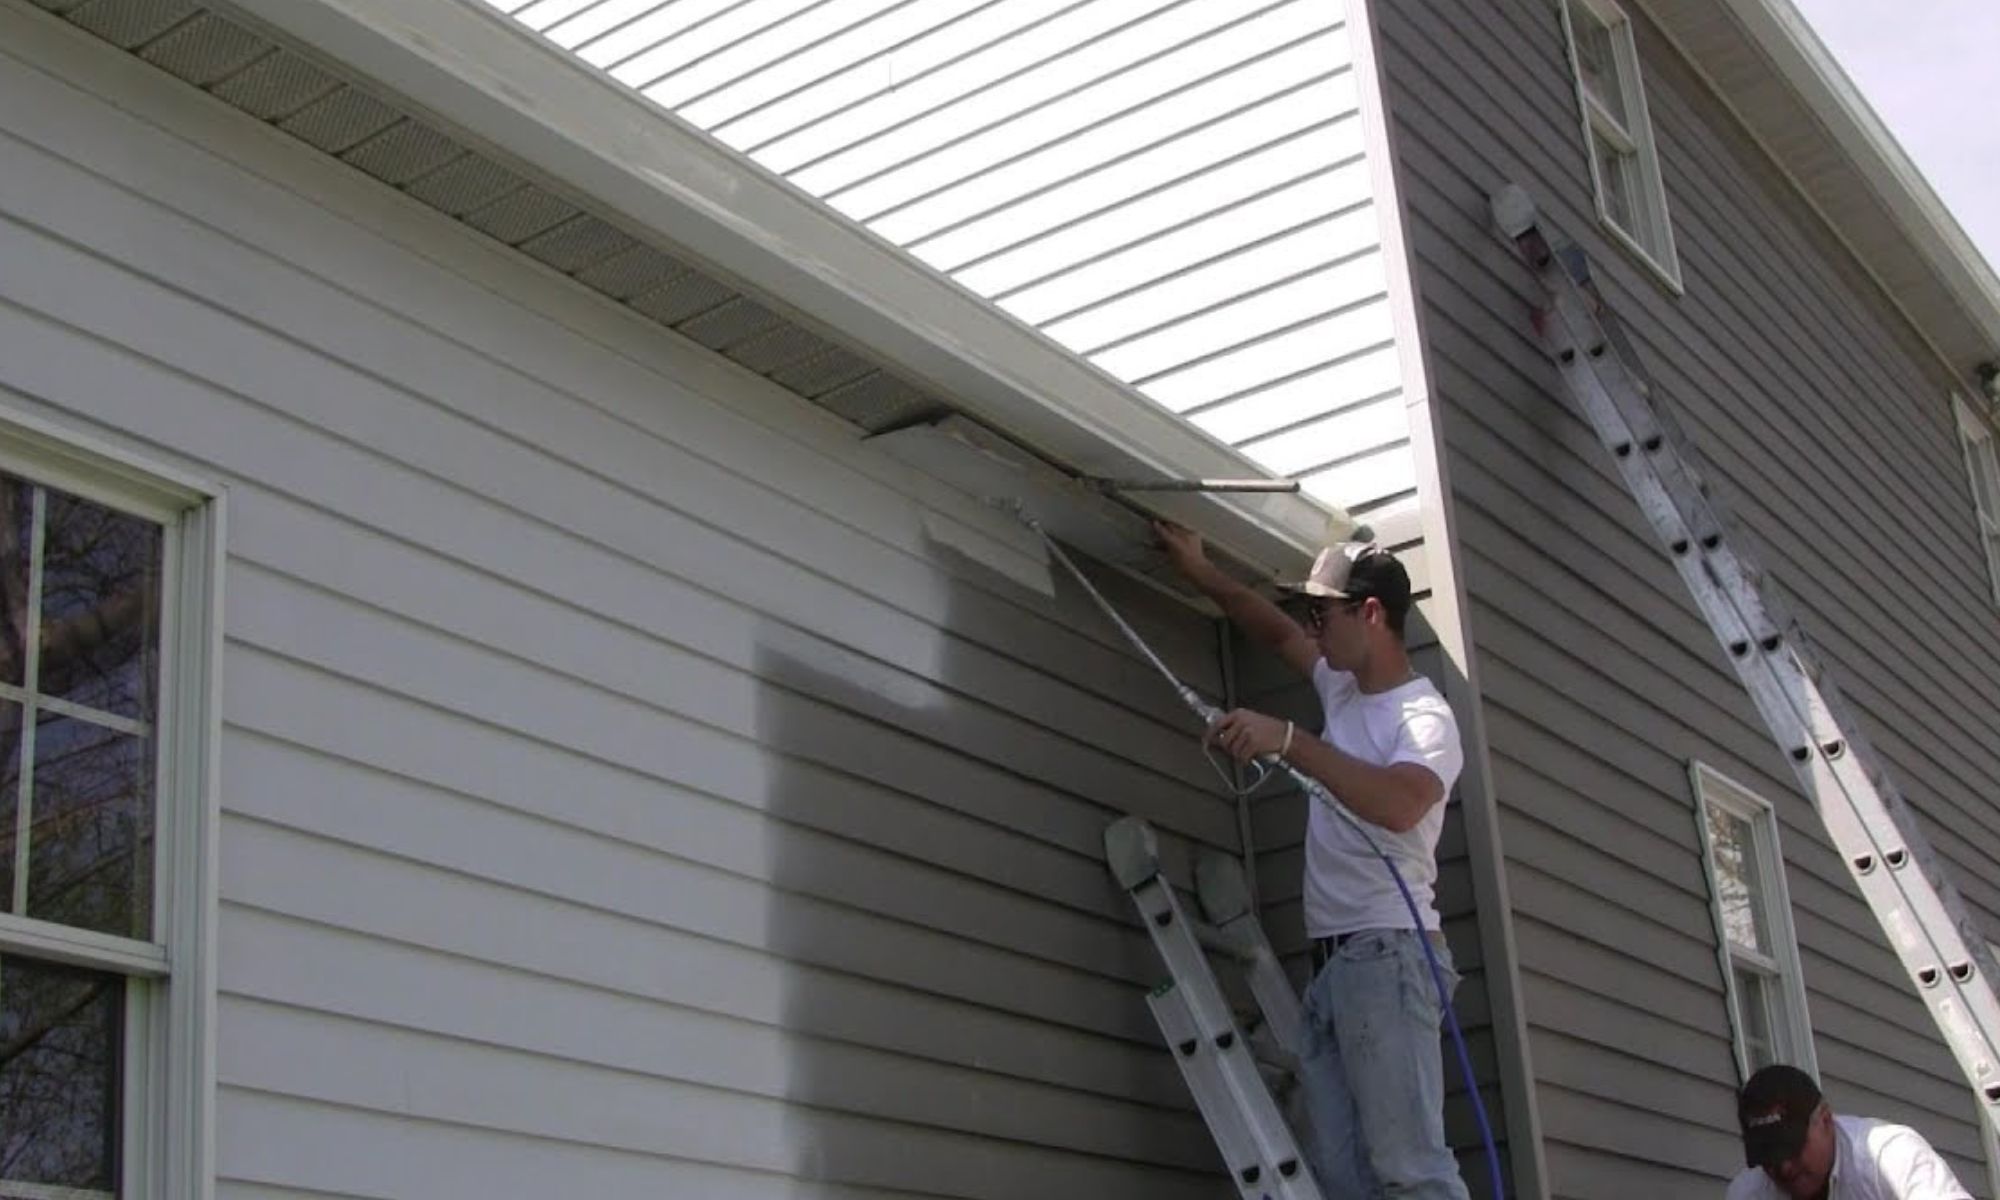 What Kind of Paint Do You Use on Aluminum Siding